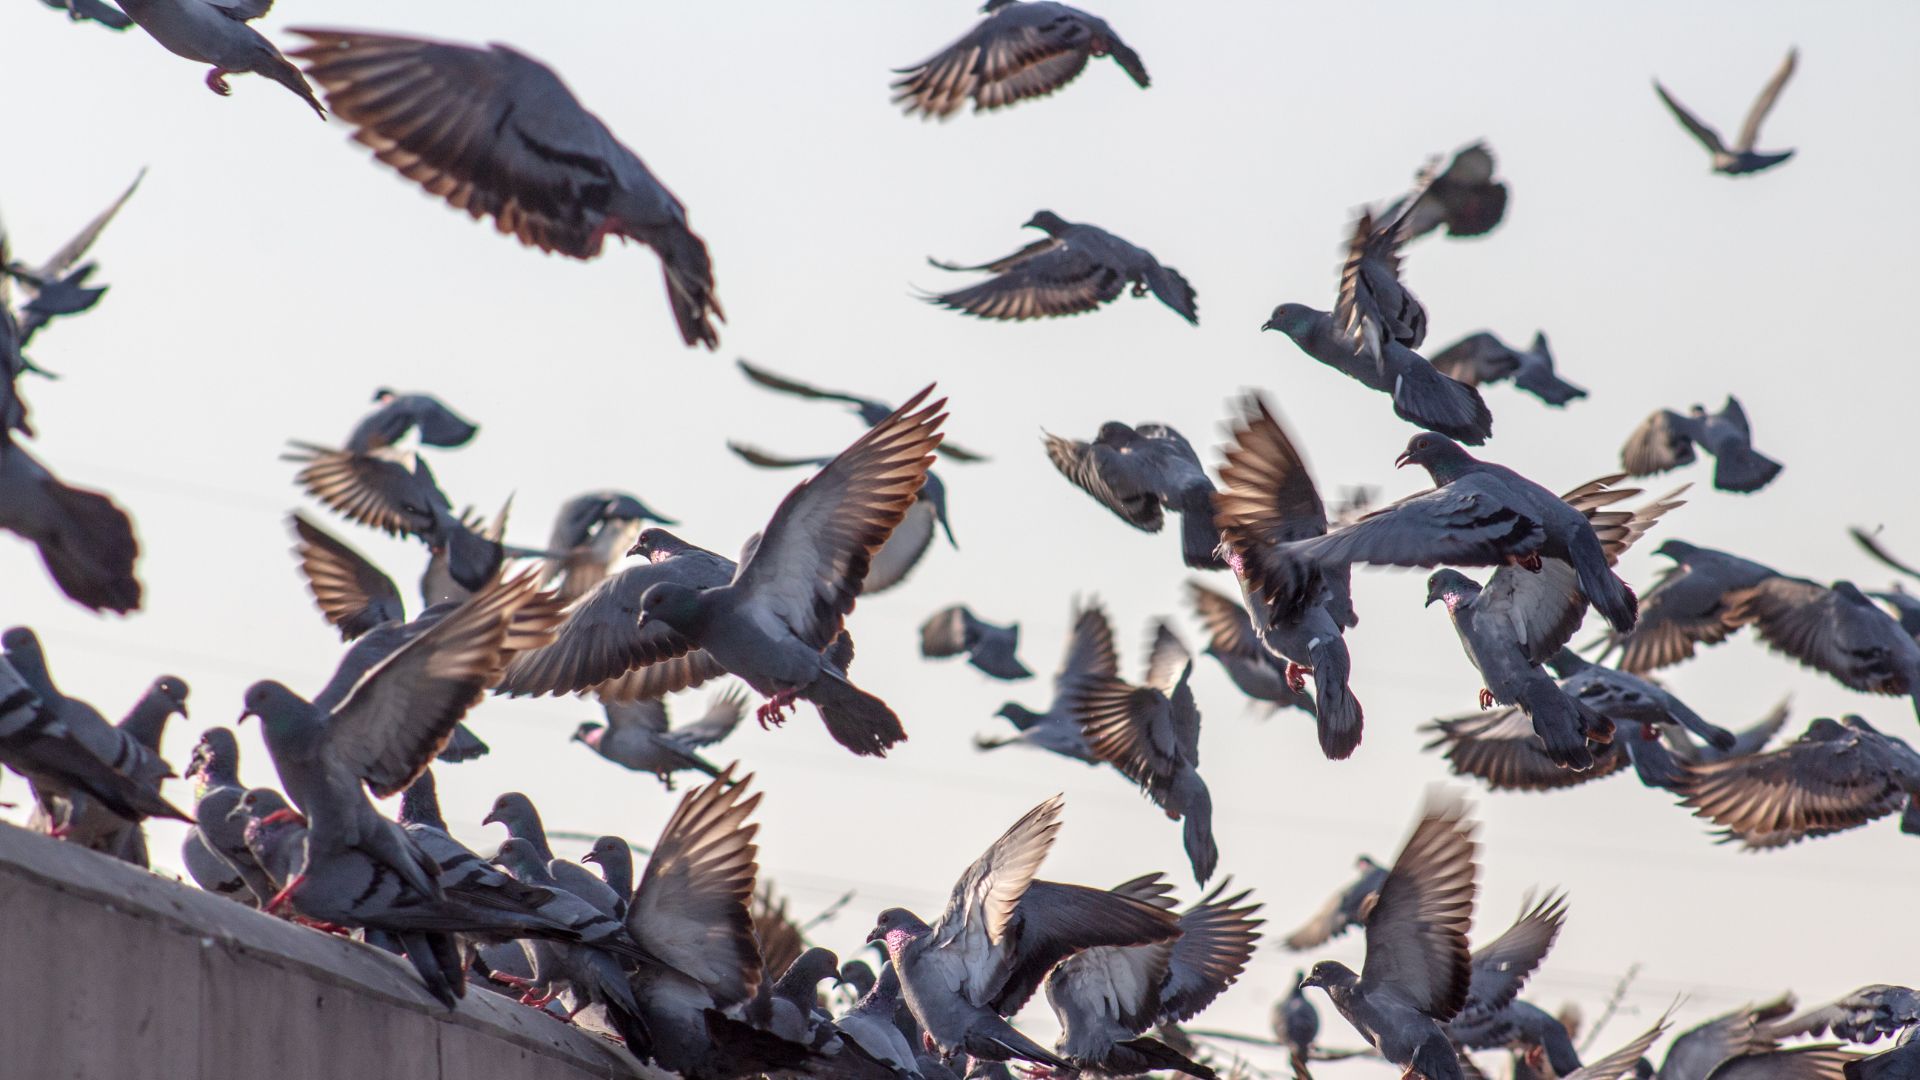 Pigeon Poo: The Toxic Risks Of Cleaning Bird Poop